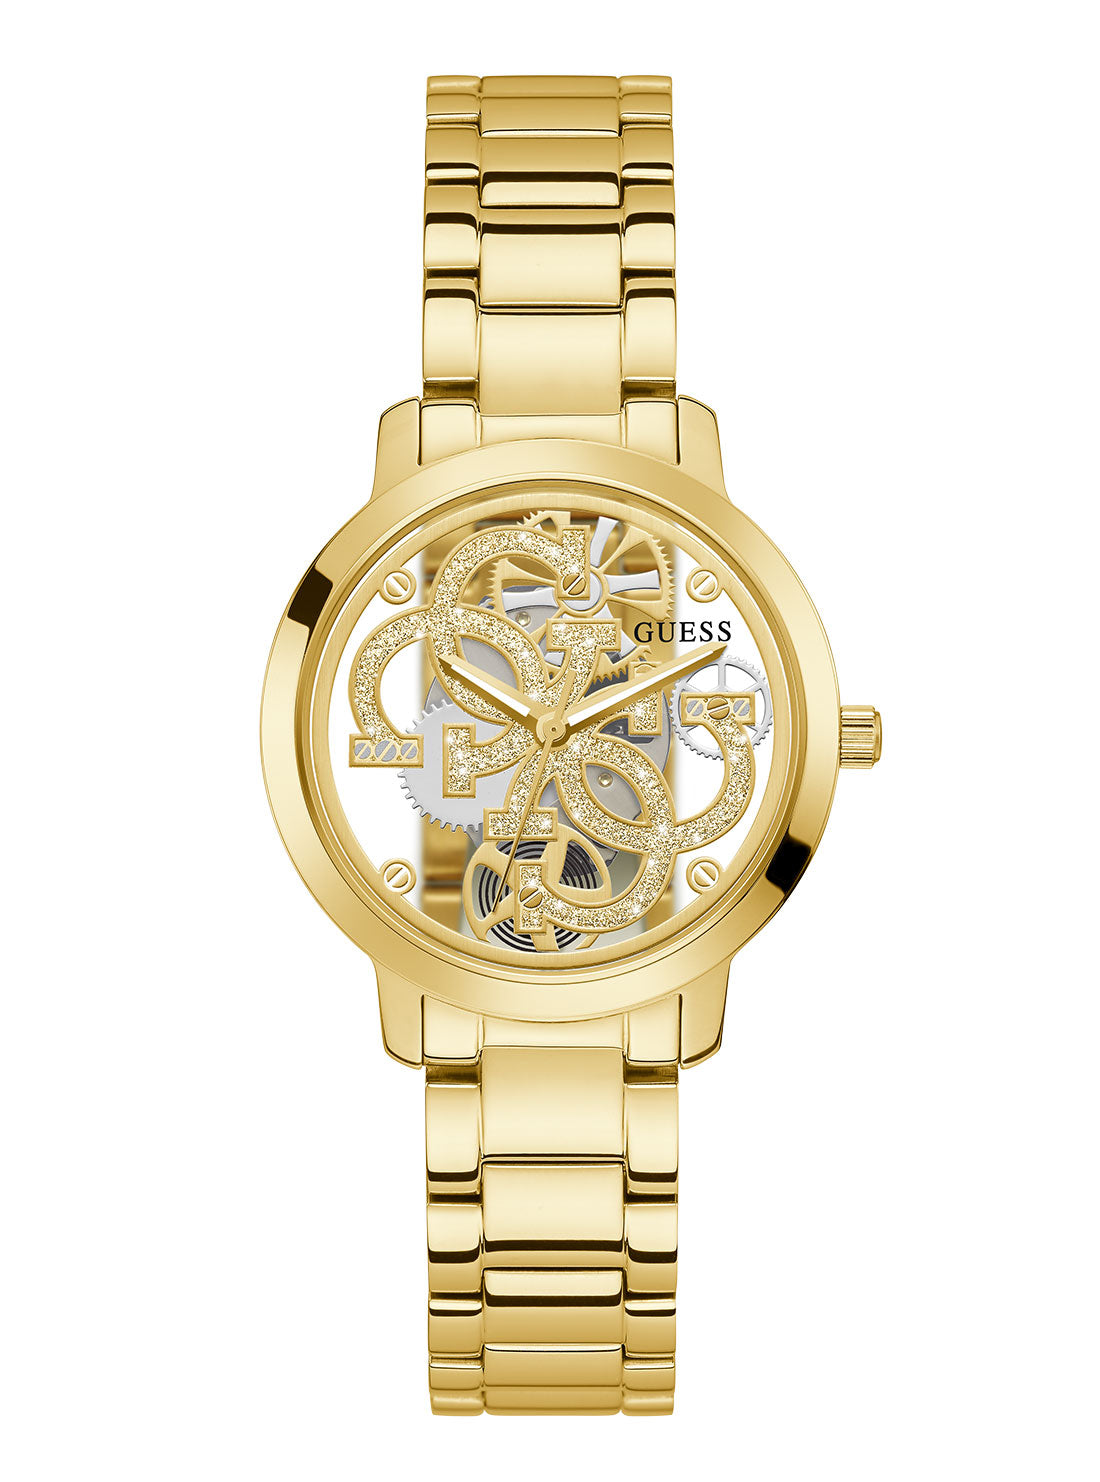 GUESS Womens Gold Quattro G Champ Watch GW0300L2 Front View